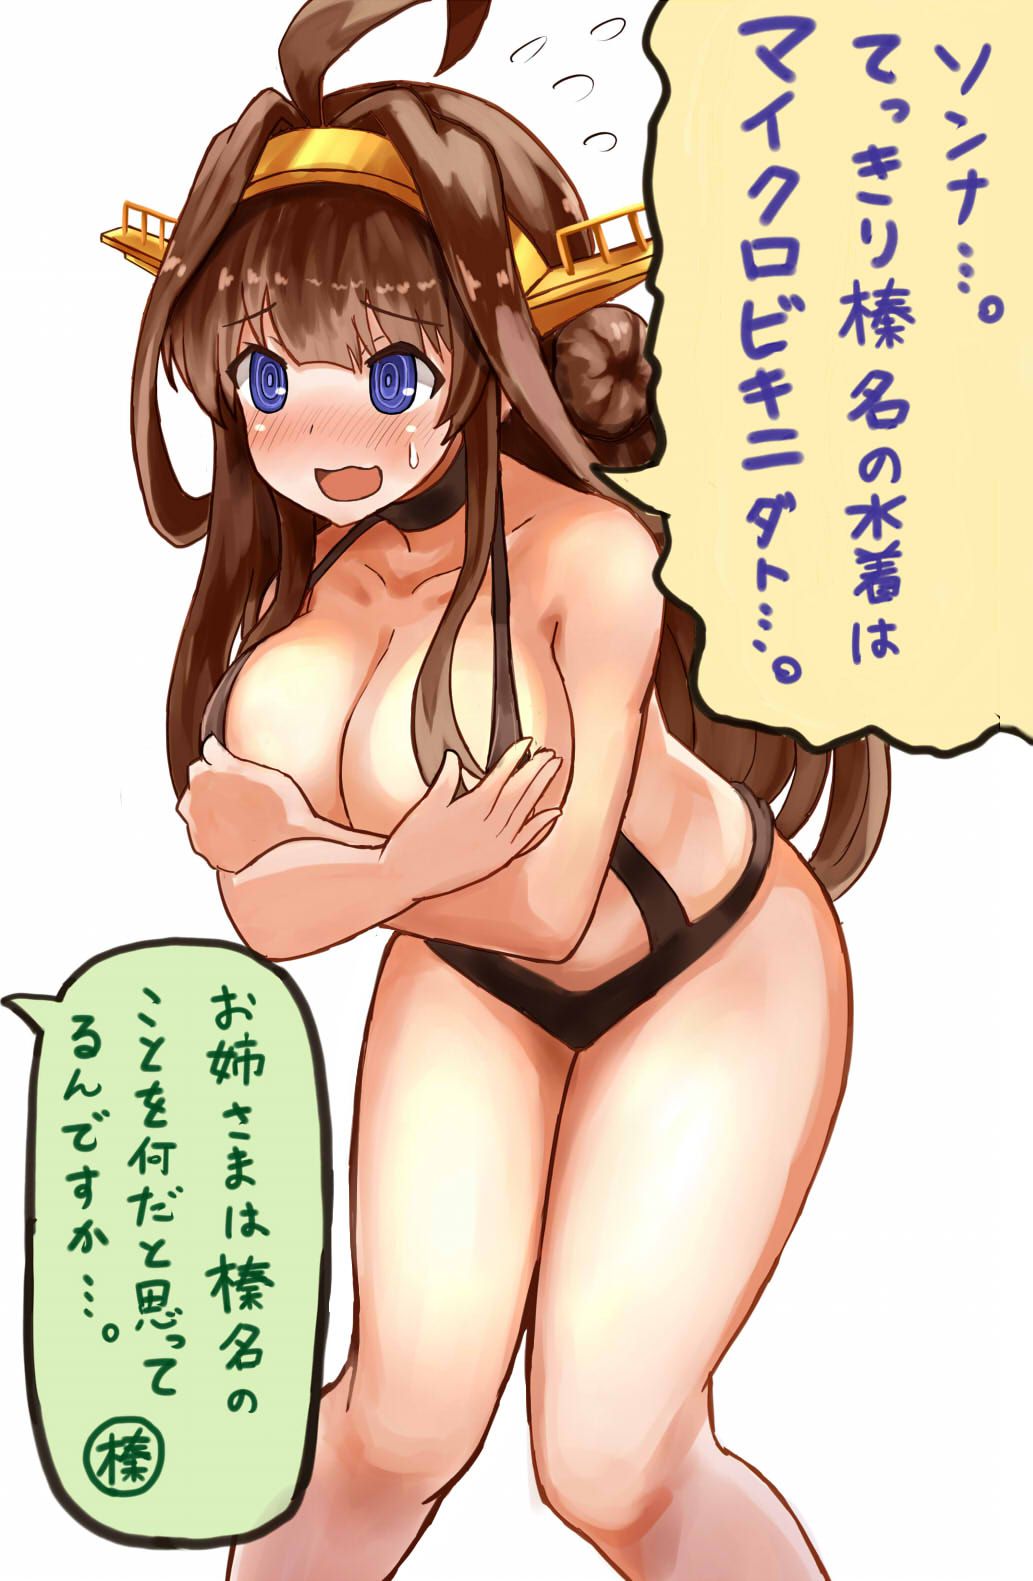 Porori Probability 100%! Secondary erotic picture of the girl wearing the slingshot wwww part3 21